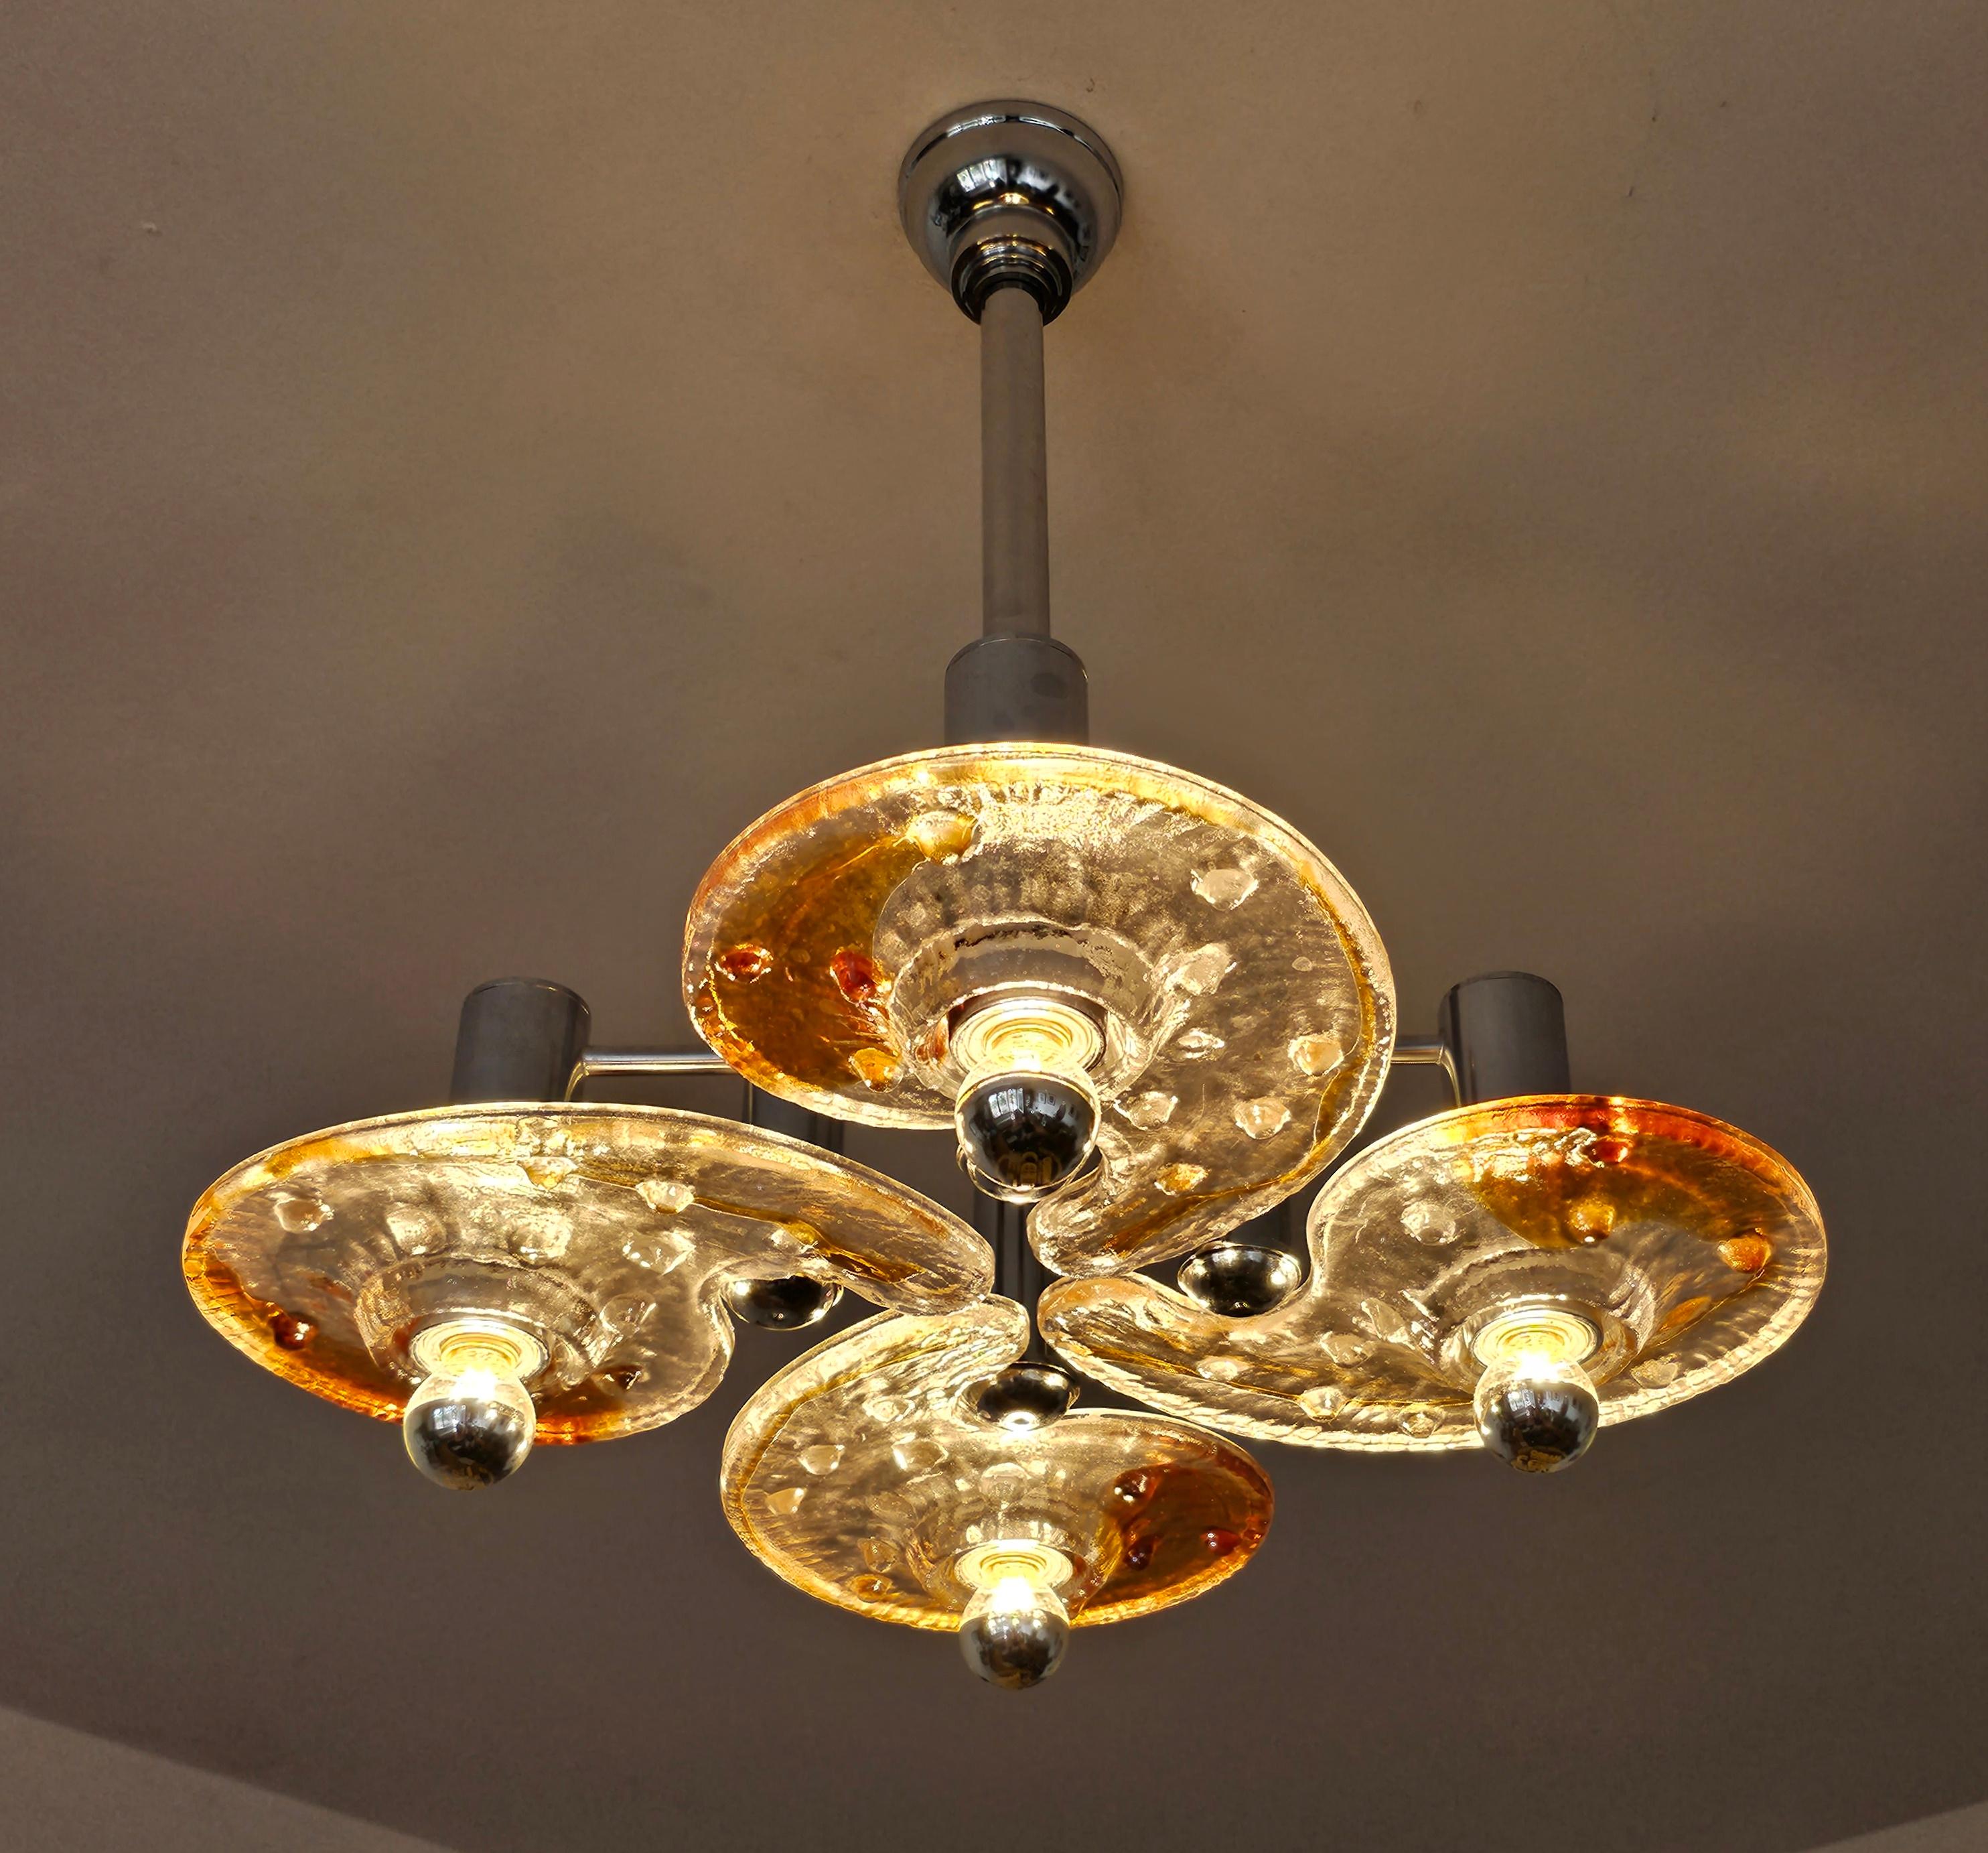 In this listing you will find an extremely rare Mid Century Modern chandelier done in hand molded and fused dark amber and clear Murano glass plates in organic shape. This chandelier was designed by a renowned designer Carlo Nason for the MAZZEGA